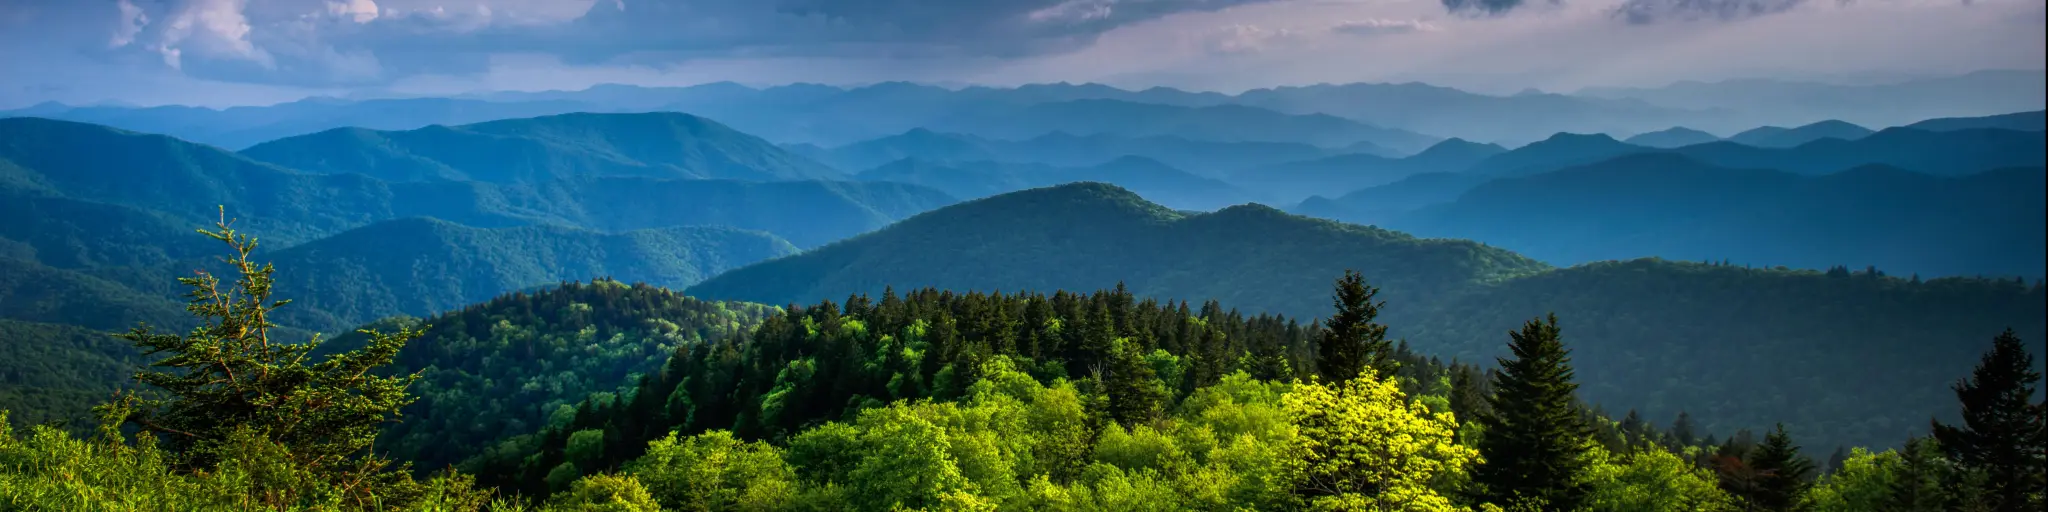 Asheville, North Carolina, USA with the Blue Ridges of the Appalachian Mountains on the Blue Ridge Parkway near Asheville and Waynesville.